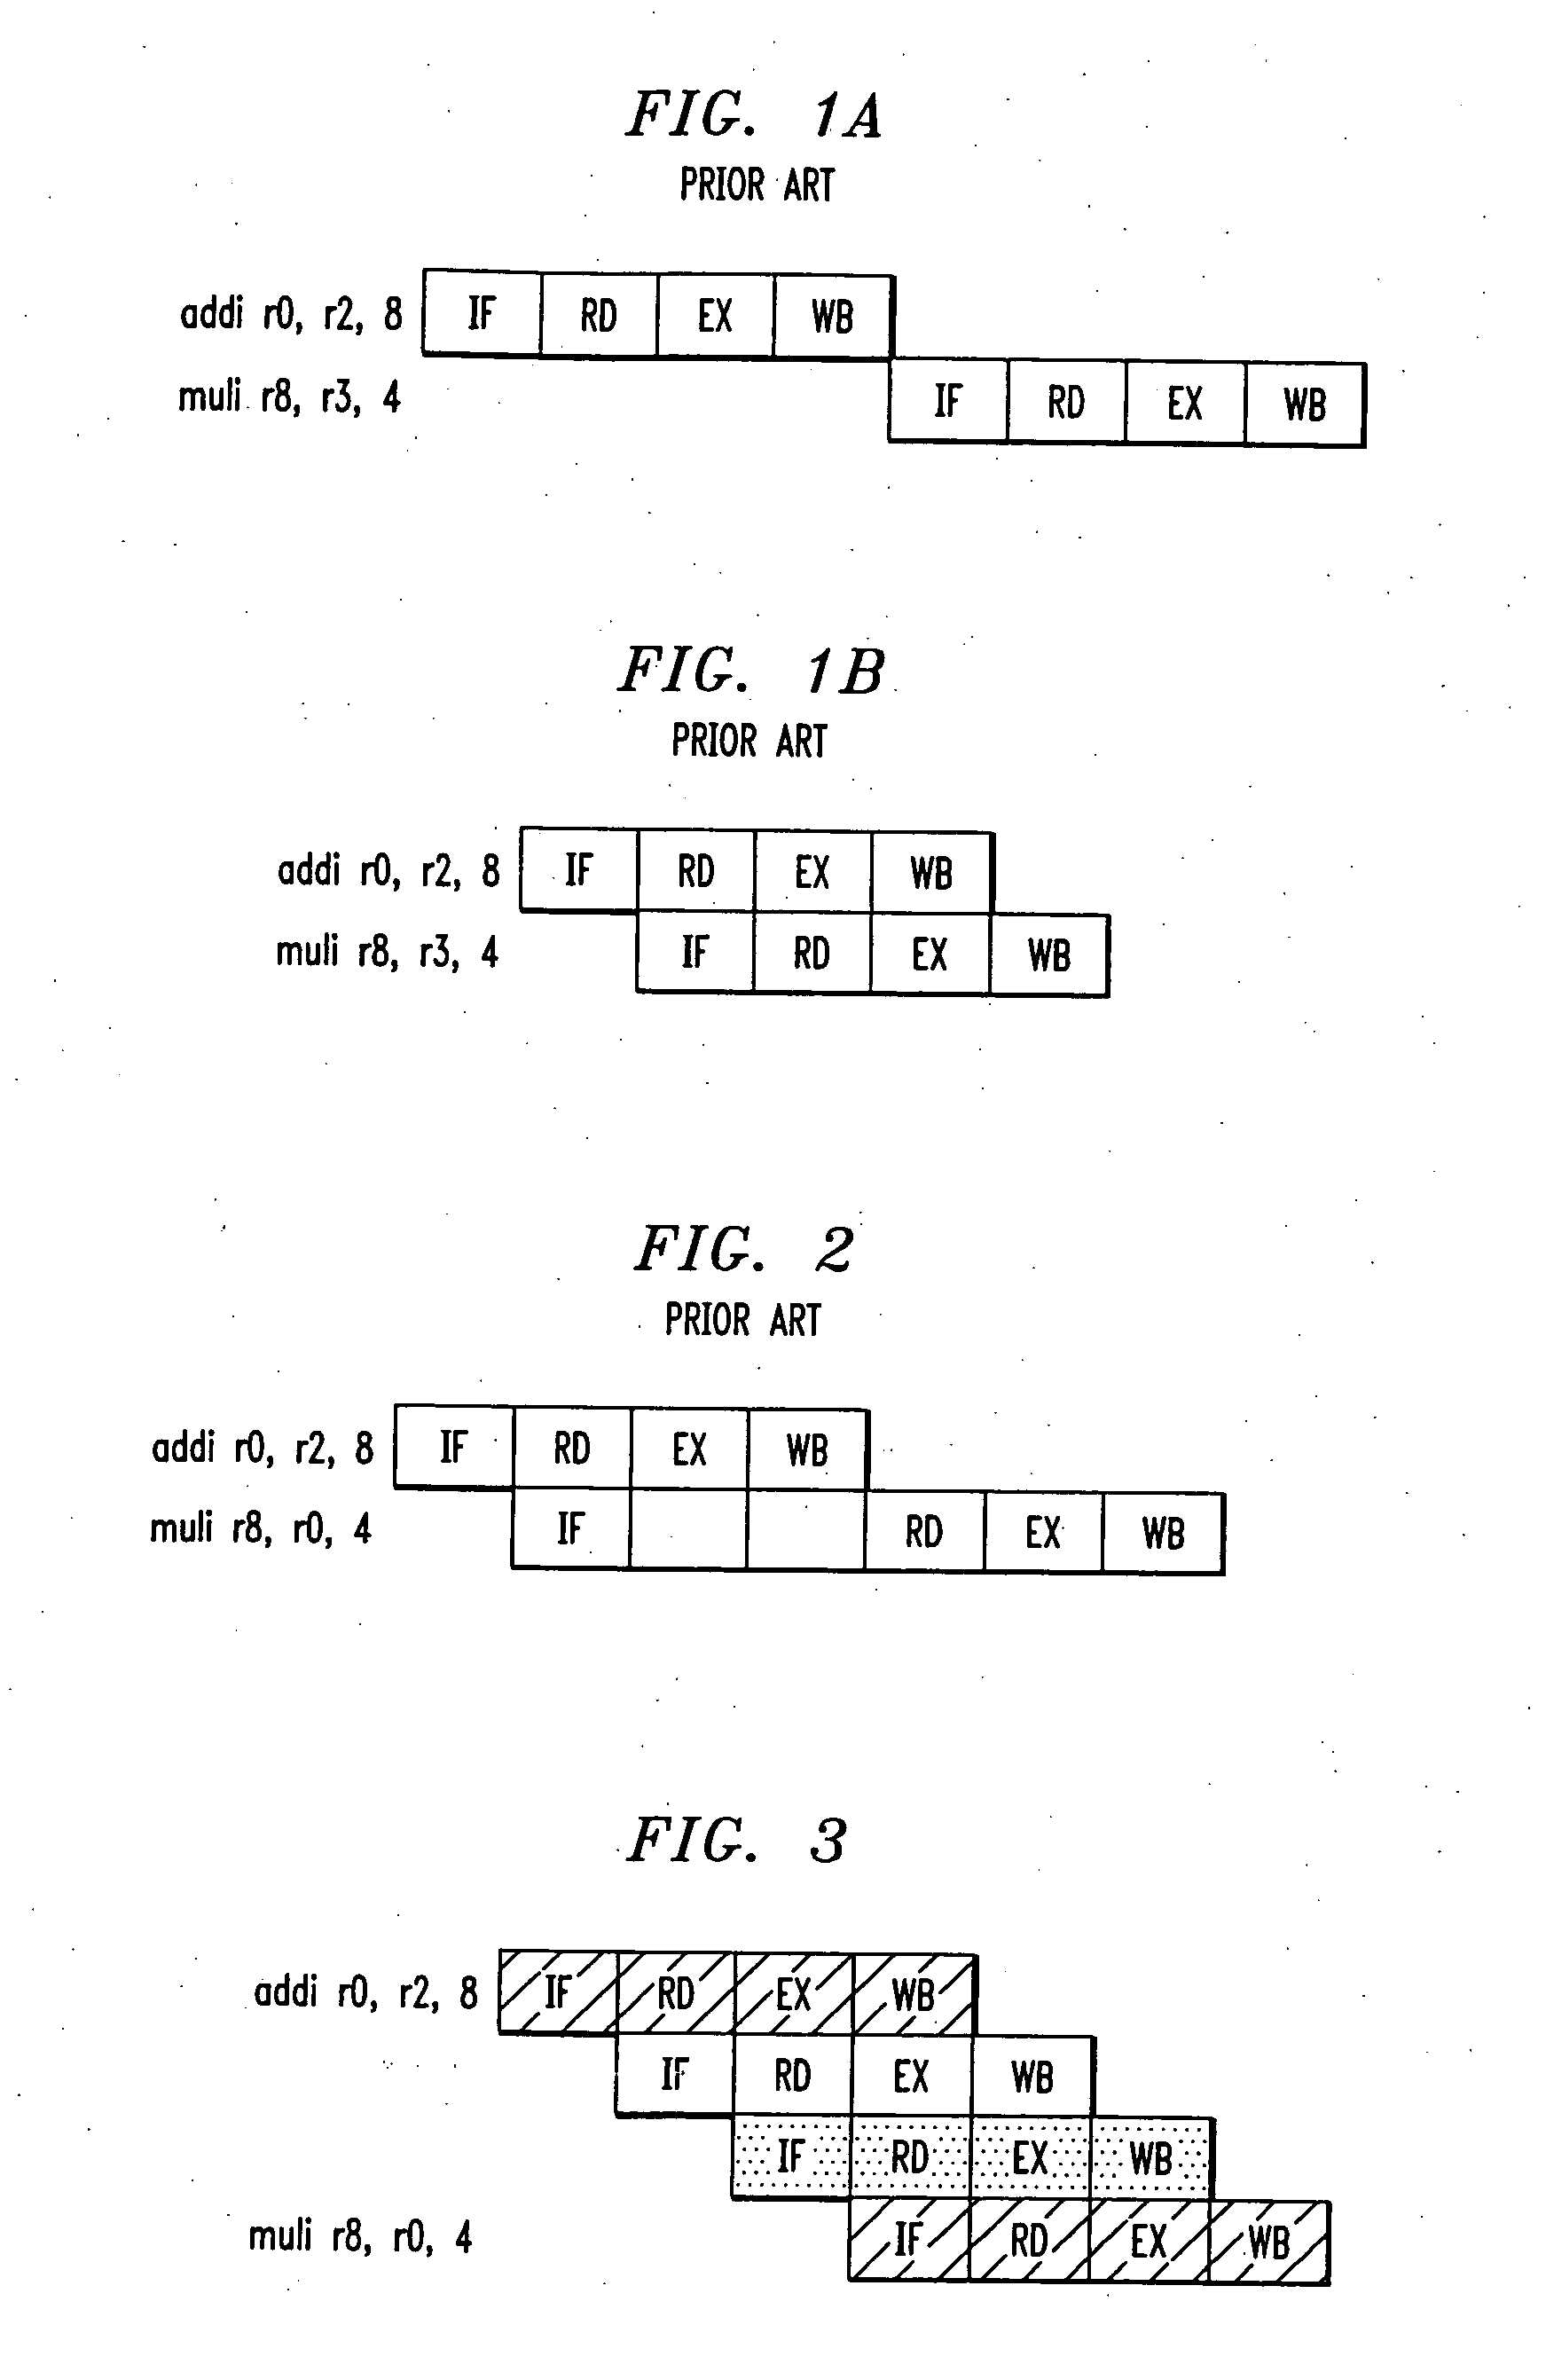 Multithreaded processor with multiple concurrent pipelines per thread